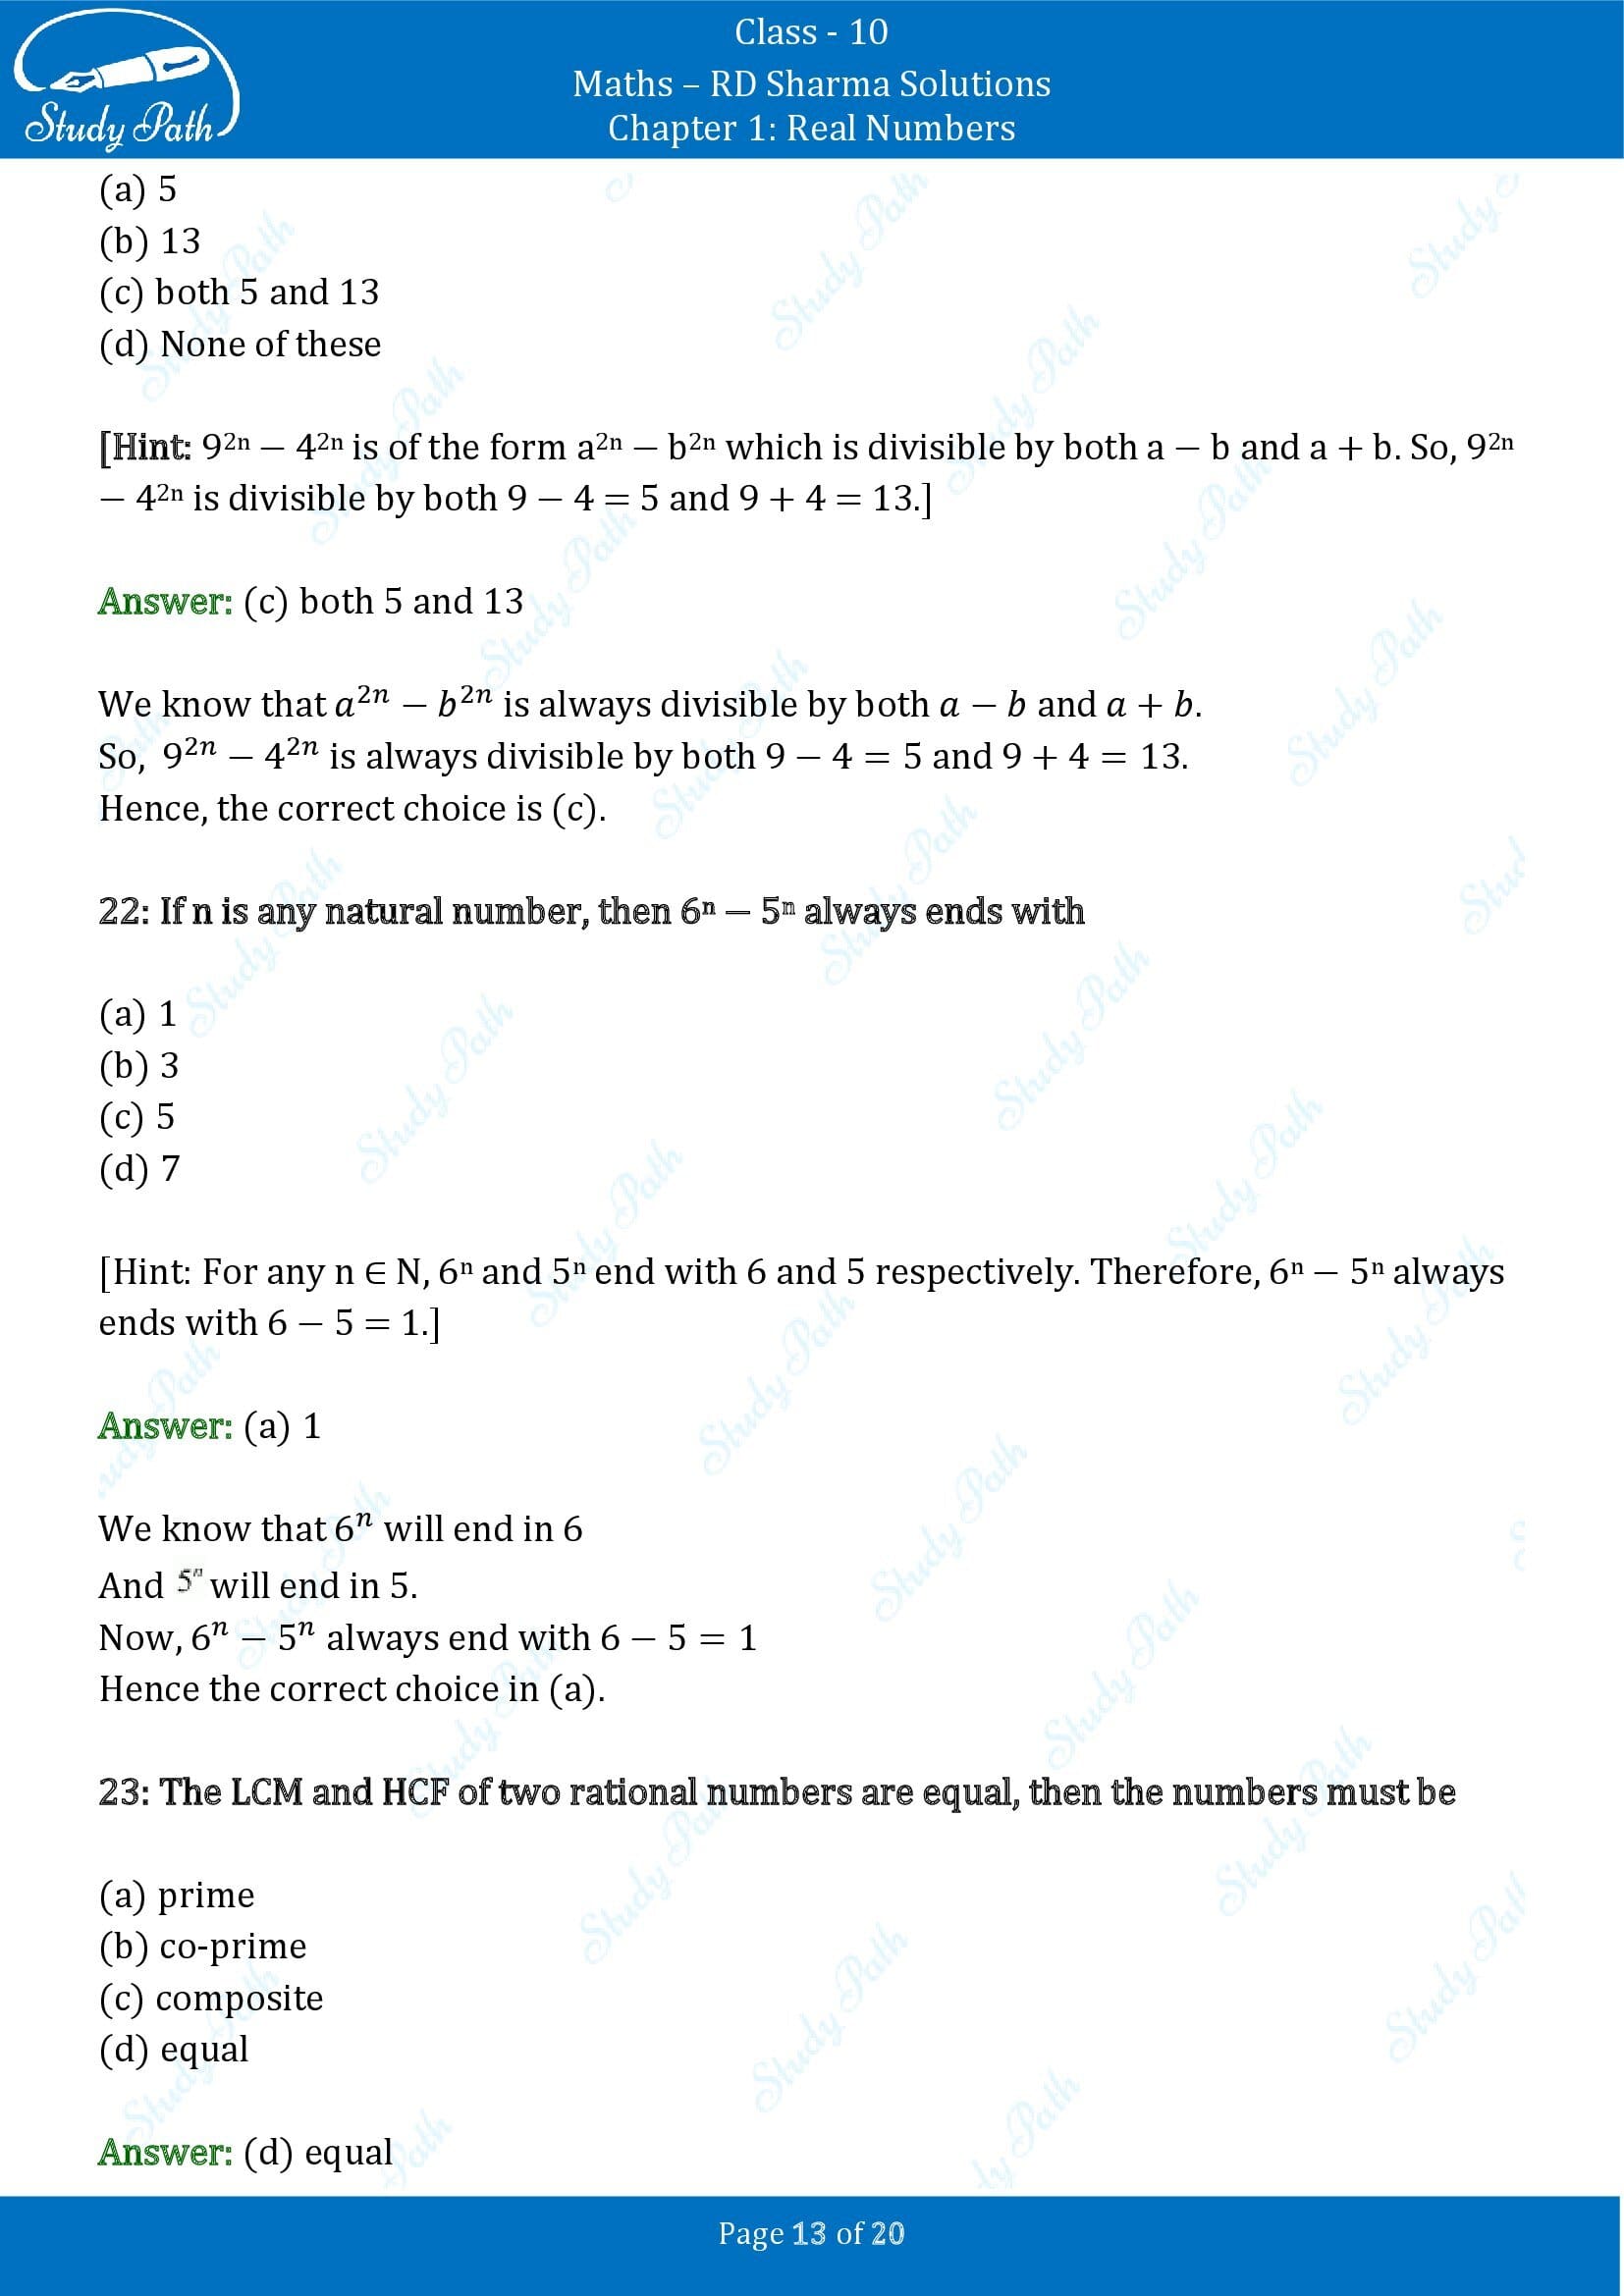 RD Sharma Solutions Class 10 Chapter 1 Real Numbers Multiple Choice Questions MCQs 00013